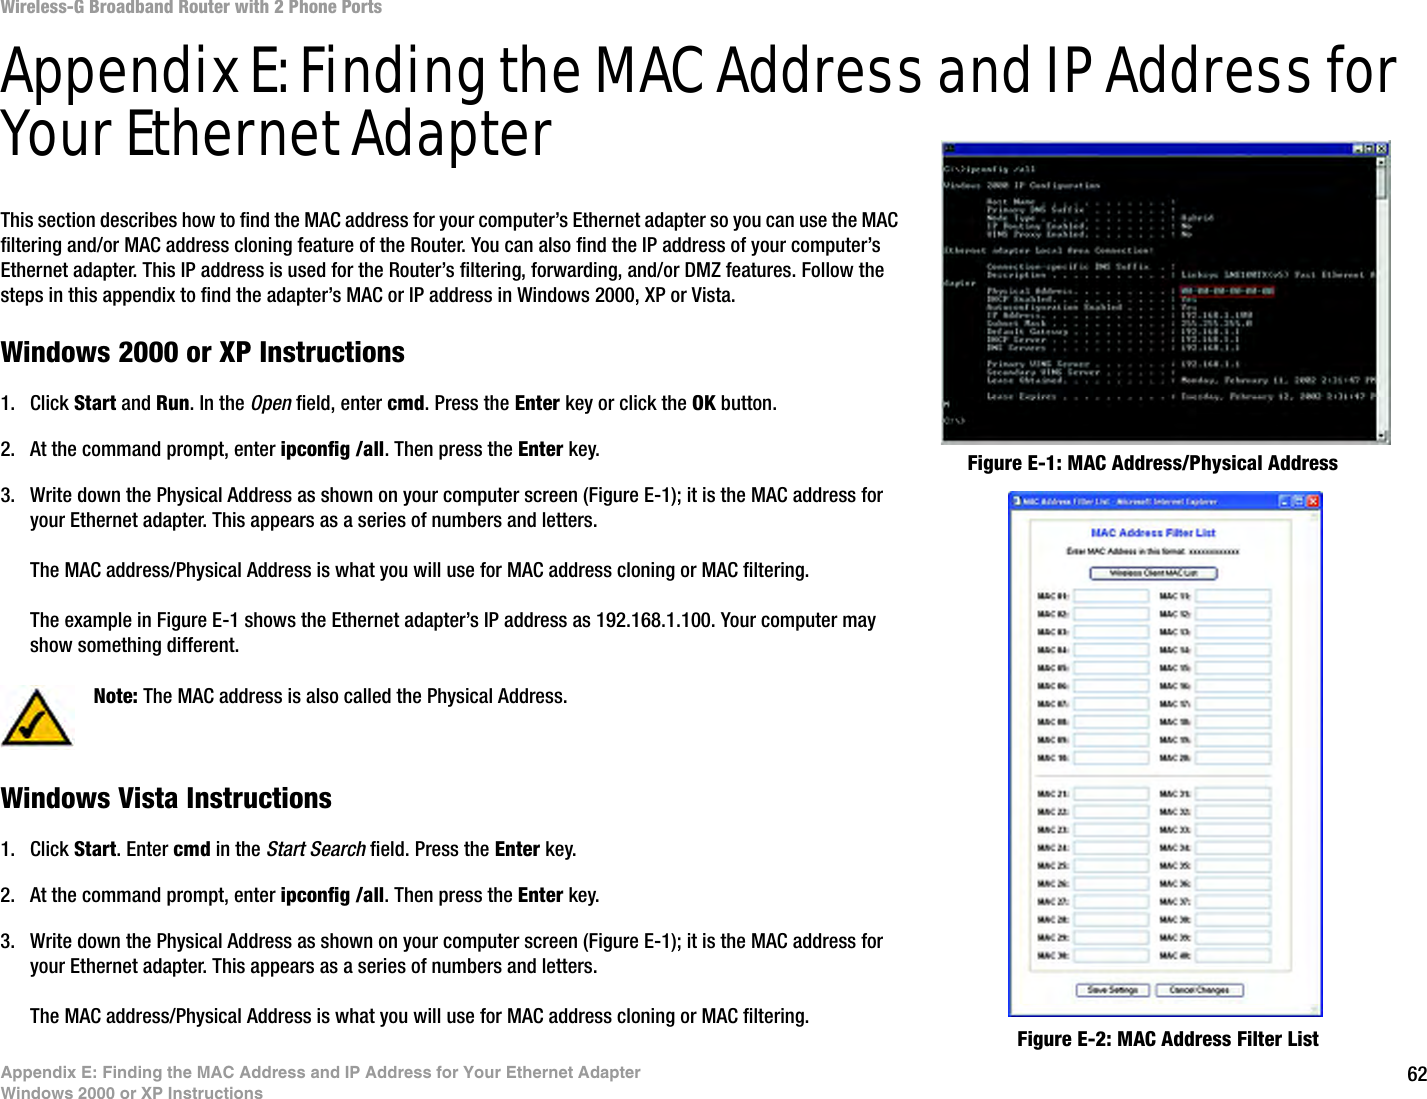 62Appendix E: Finding the MAC Address and IP Address for Your Ethernet AdapterWindows 2000 or XP InstructionsWireless-G Broadband Router with 2 Phone PortsAppendix E: Finding the MAC Address and IP Address for Your Ethernet AdapterThis section describes how to find the MAC address for your computer’s Ethernet adapter so you can use the MAC filtering and/or MAC address cloning feature of the Router. You can also find the IP address of your computer’s Ethernet adapter. This IP address is used for the Router’s filtering, forwarding, and/or DMZ features. Follow the steps in this appendix to find the adapter’s MAC or IP address in Windows 2000, XP or Vista.Windows 2000 or XP Instructions1. Click Start and Run. In the Open field, enter cmd. Press the Enter key or click the OK button.2. At the command prompt, enter ipconfig /all. Then press the Enter key.3. Write down the Physical Address as shown on your computer screen (Figure E-1); it is the MAC address for your Ethernet adapter. This appears as a series of numbers and letters.The MAC address/Physical Address is what you will use for MAC address cloning or MAC filtering.The example in Figure E-1 shows the Ethernet adapter’s IP address as 192.168.1.100. Your computer may show something different.Windows Vista Instructions1. Click Start. Enter cmd in the Start Search field. Press the Enter key.2. At the command prompt, enter ipconfig /all. Then press the Enter key.3. Write down the Physical Address as shown on your computer screen (Figure E-1); it is the MAC address for your Ethernet adapter. This appears as a series of numbers and letters.The MAC address/Physical Address is what you will use for MAC address cloning or MAC filtering.Figure E-2: MAC Address Filter ListFigure E-1: MAC Address/Physical AddressNote: The MAC address is also called the Physical Address.